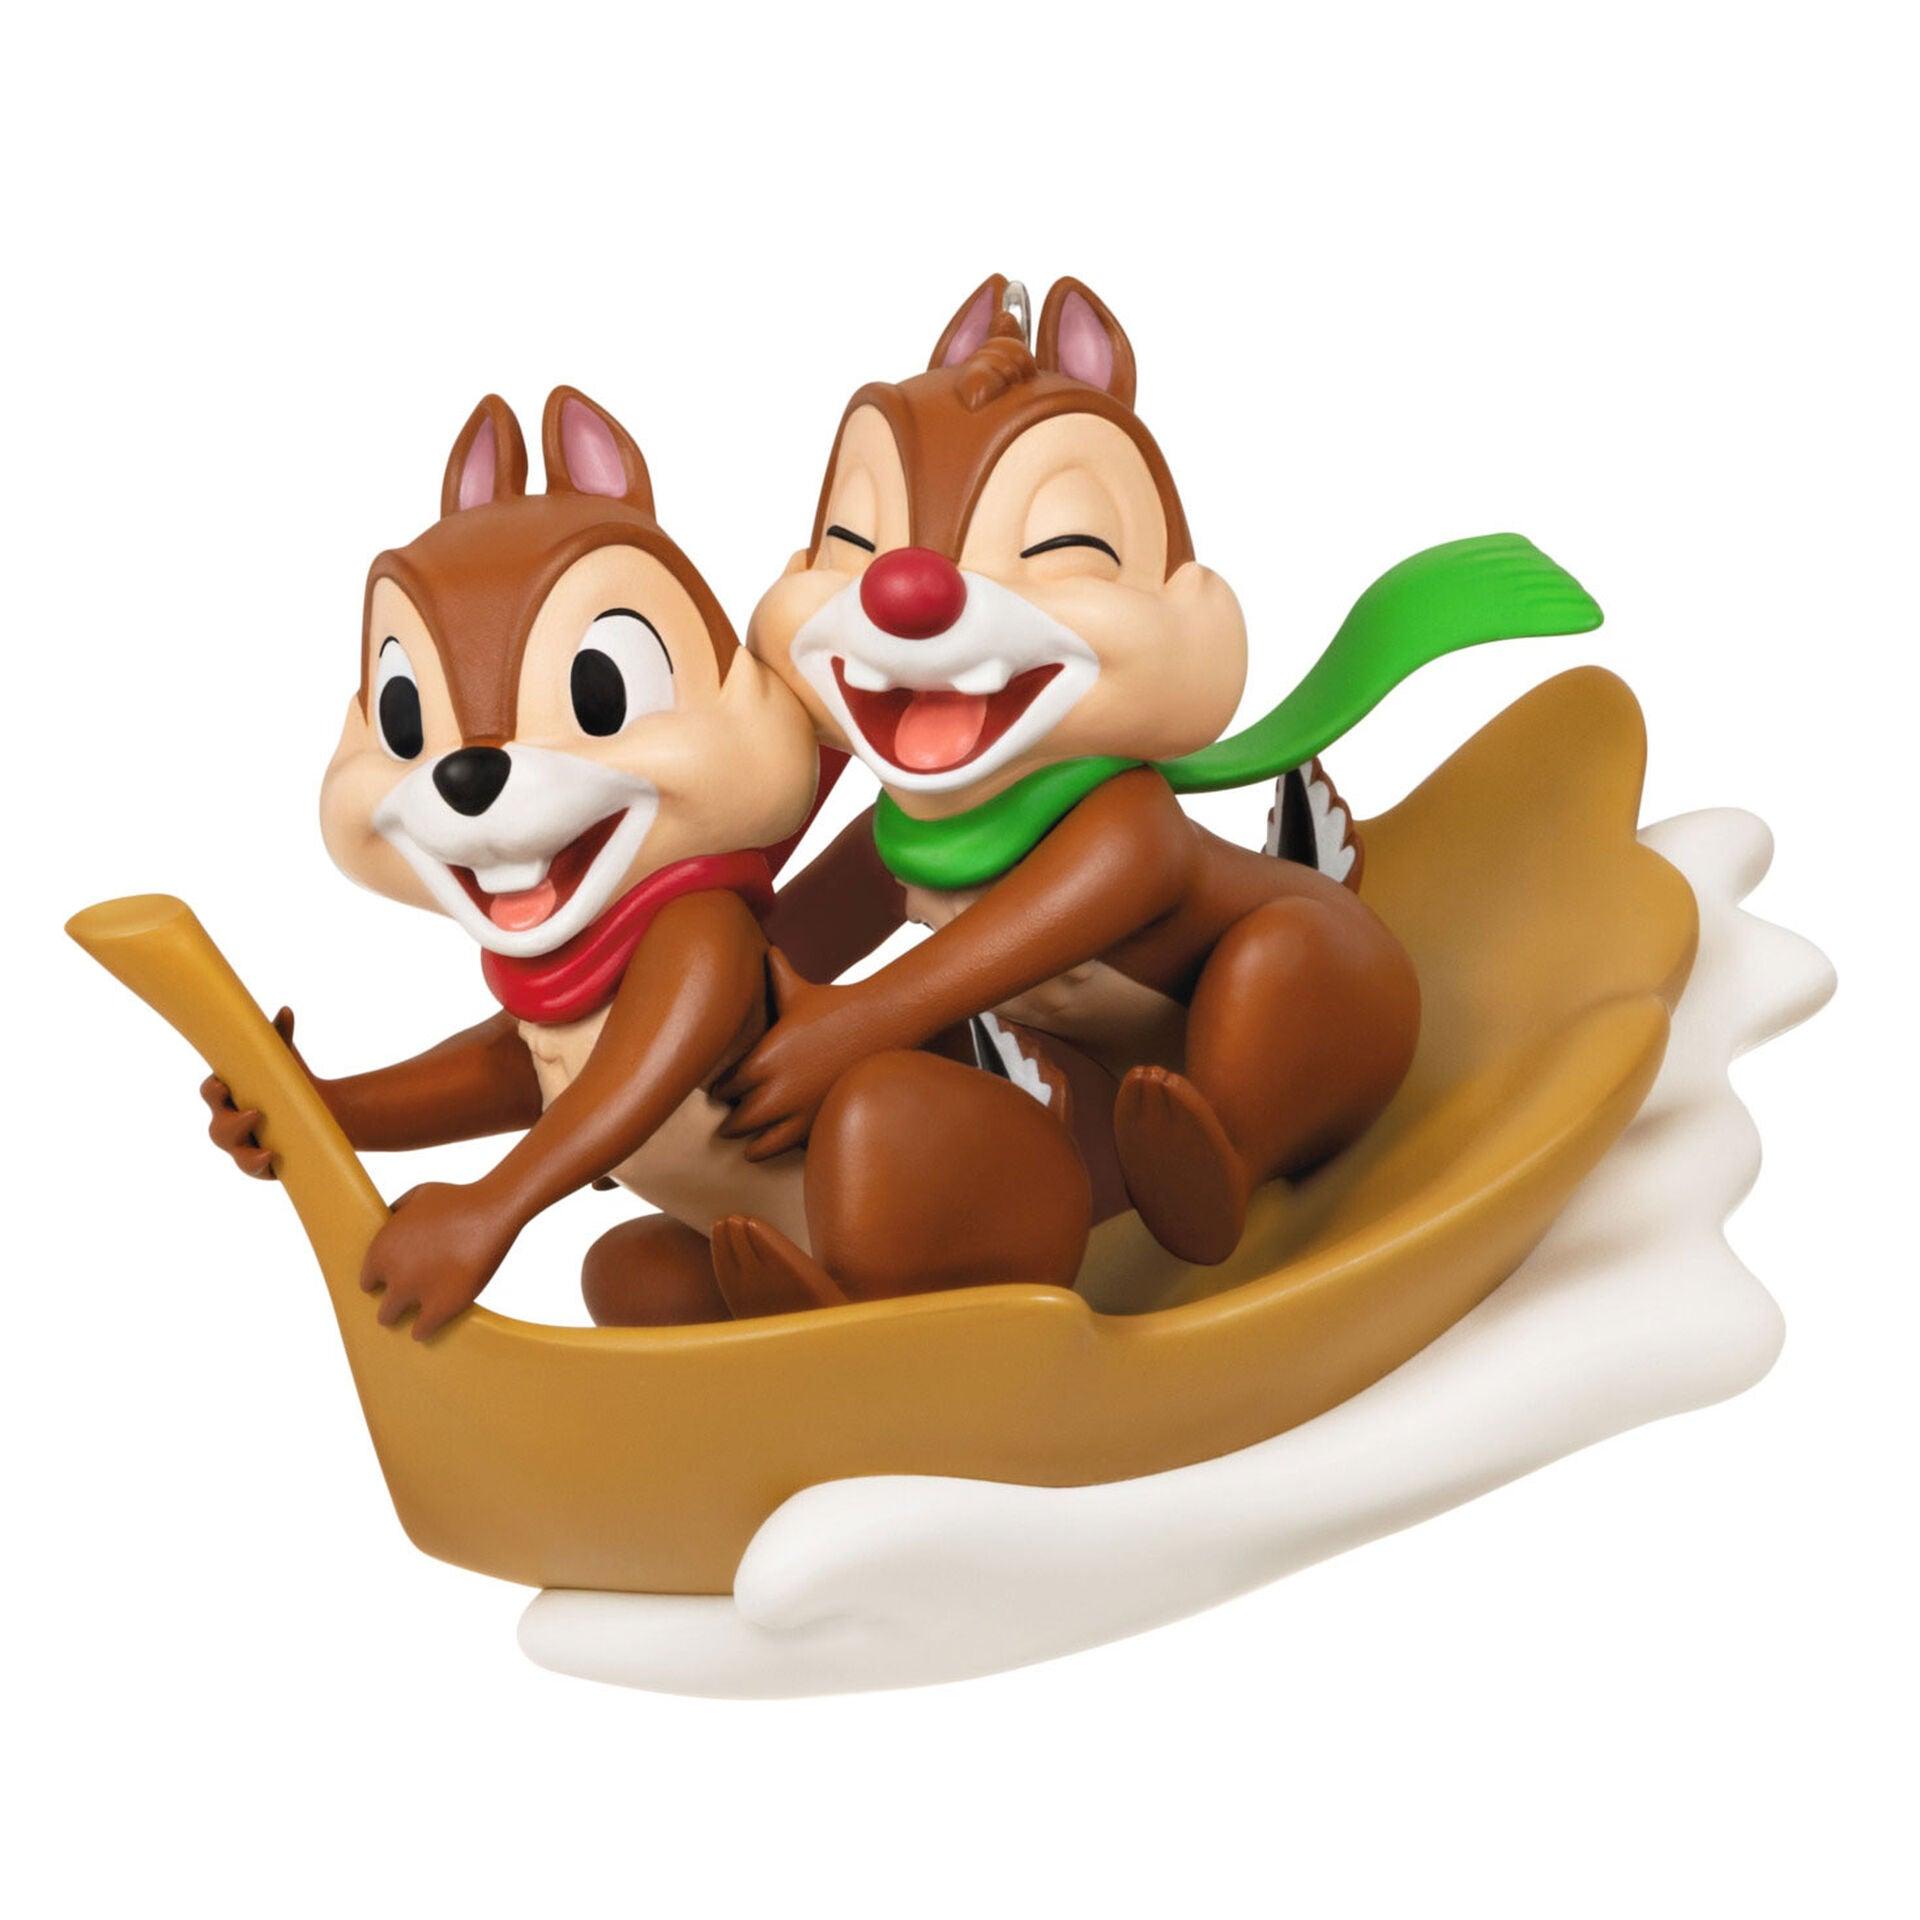 Disney Chip and Dale Snow Much Fun! Ornament